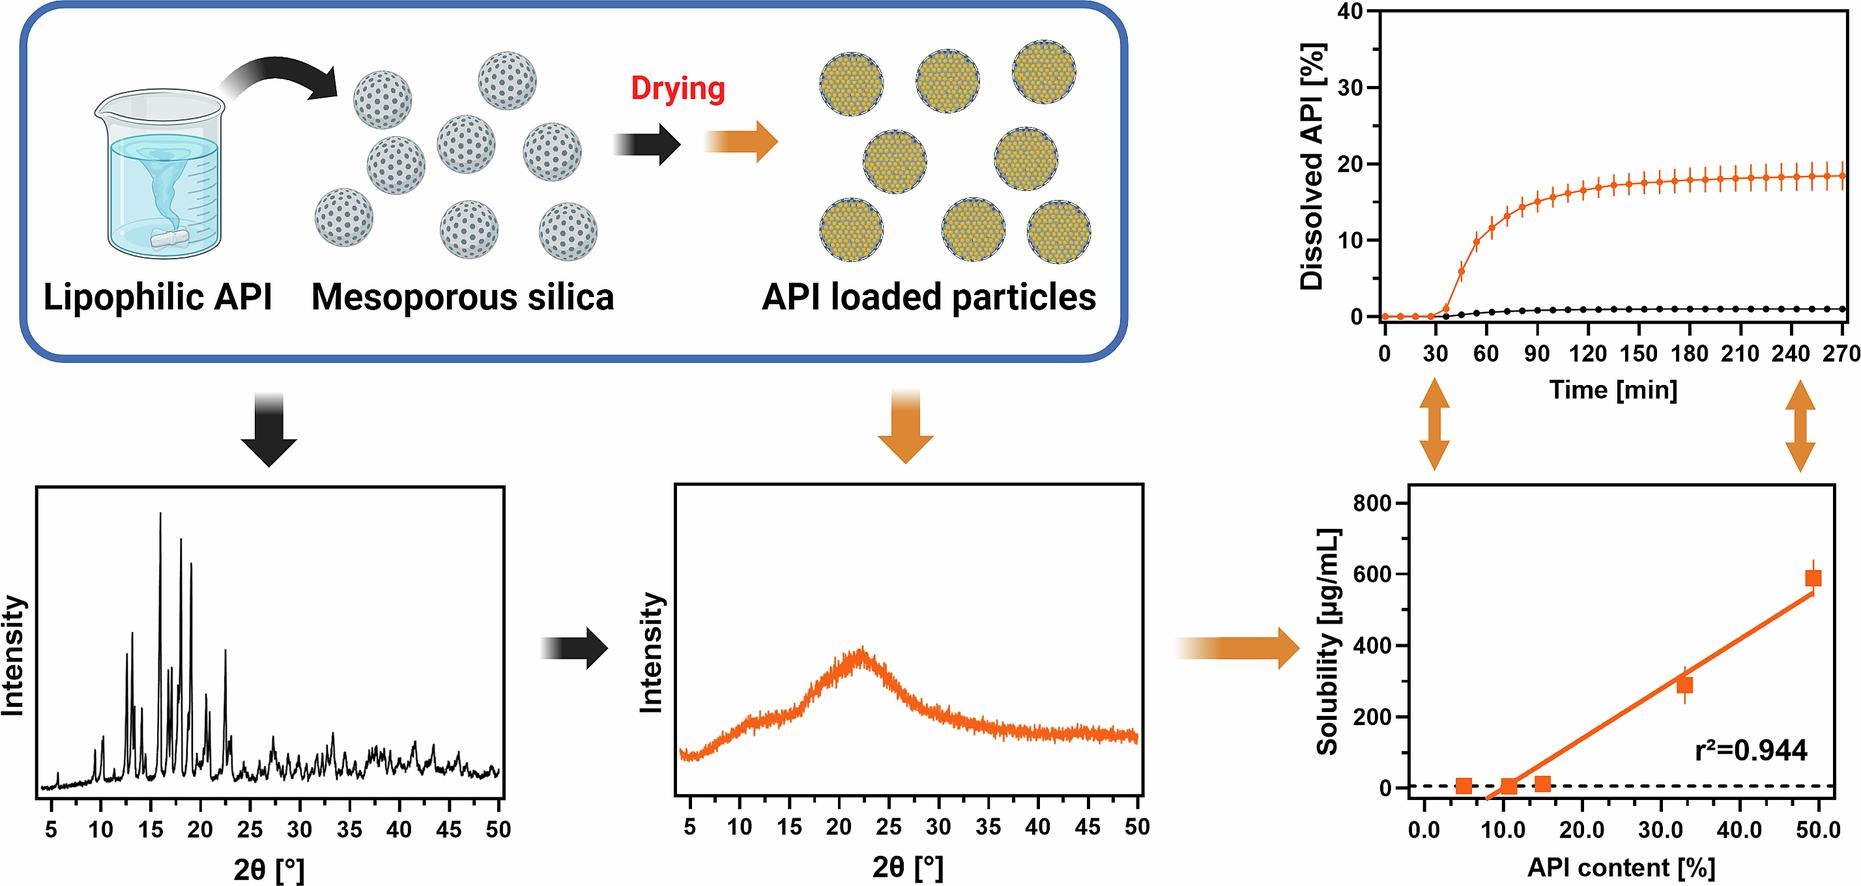 High loading of lipophilic compounds in mesoporous silica for improved solubility and dissolution performance